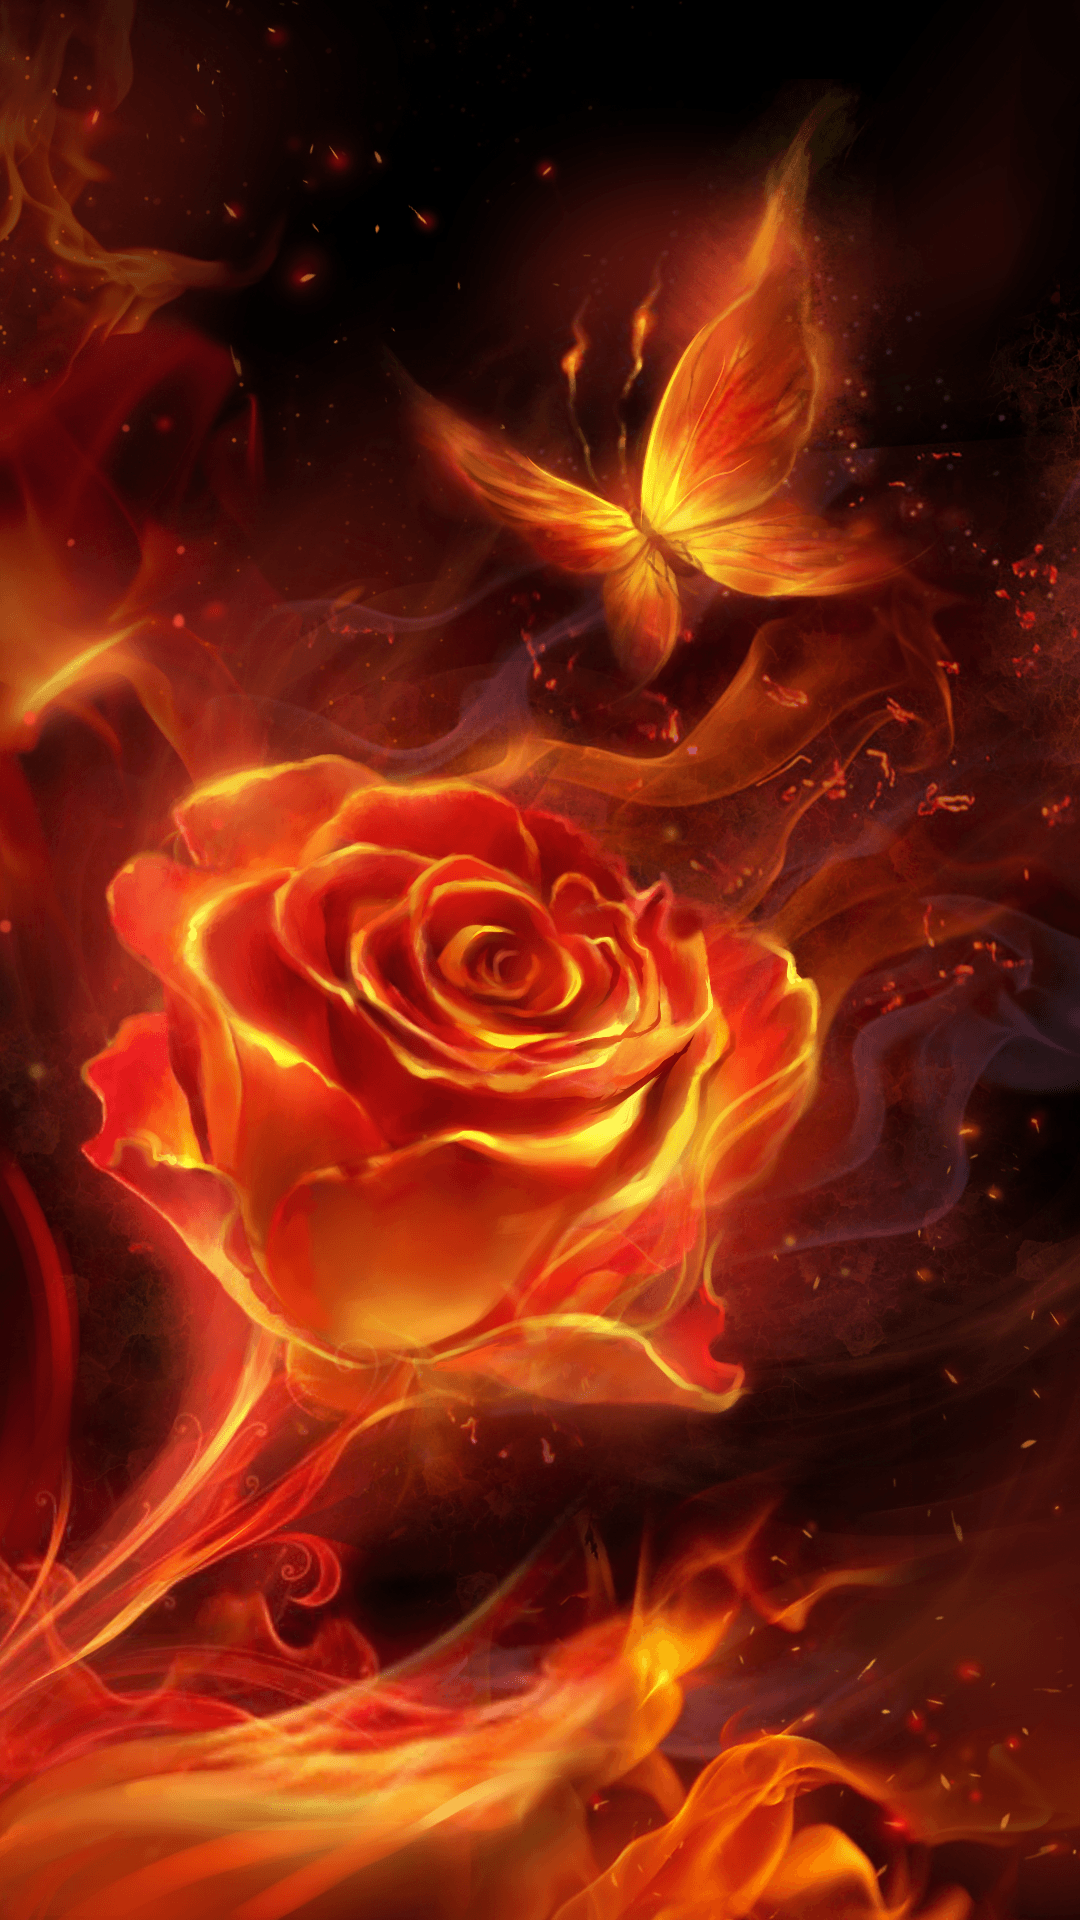 Fiery rose and butterfly! flame live wallpaper. Flame art, Fire art, Rose wallpaper